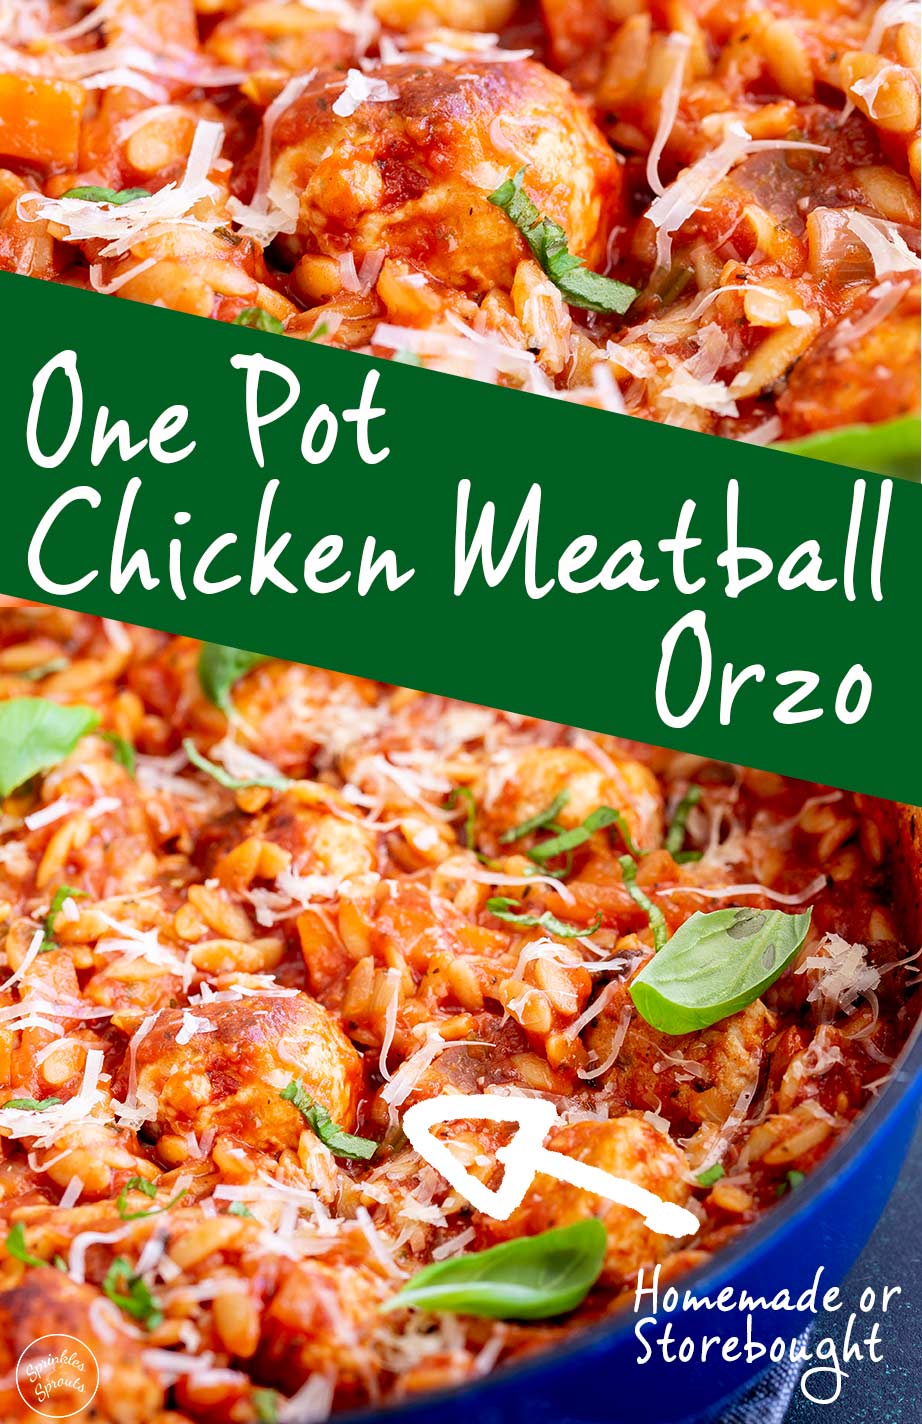 two pictures of meatball orzo with text in the middle